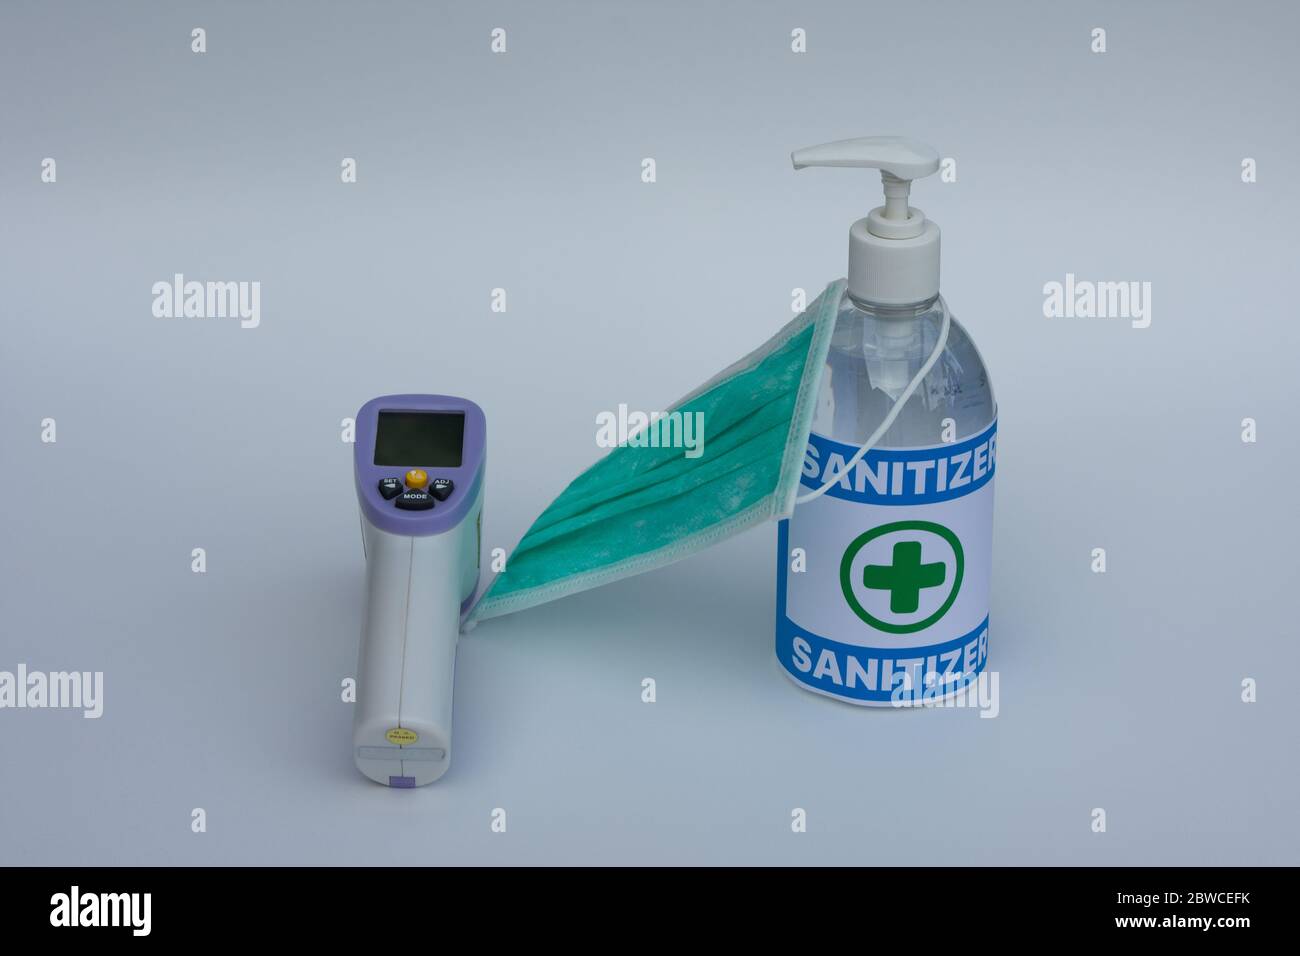 https://c8.alamy.com/comp/2BWCEFK/infrared-thermometer-surgical-mask-and-hand-sanitizer-gel-concept-of-coronavirus-pandemic-protection-2BWCEFK.jpg